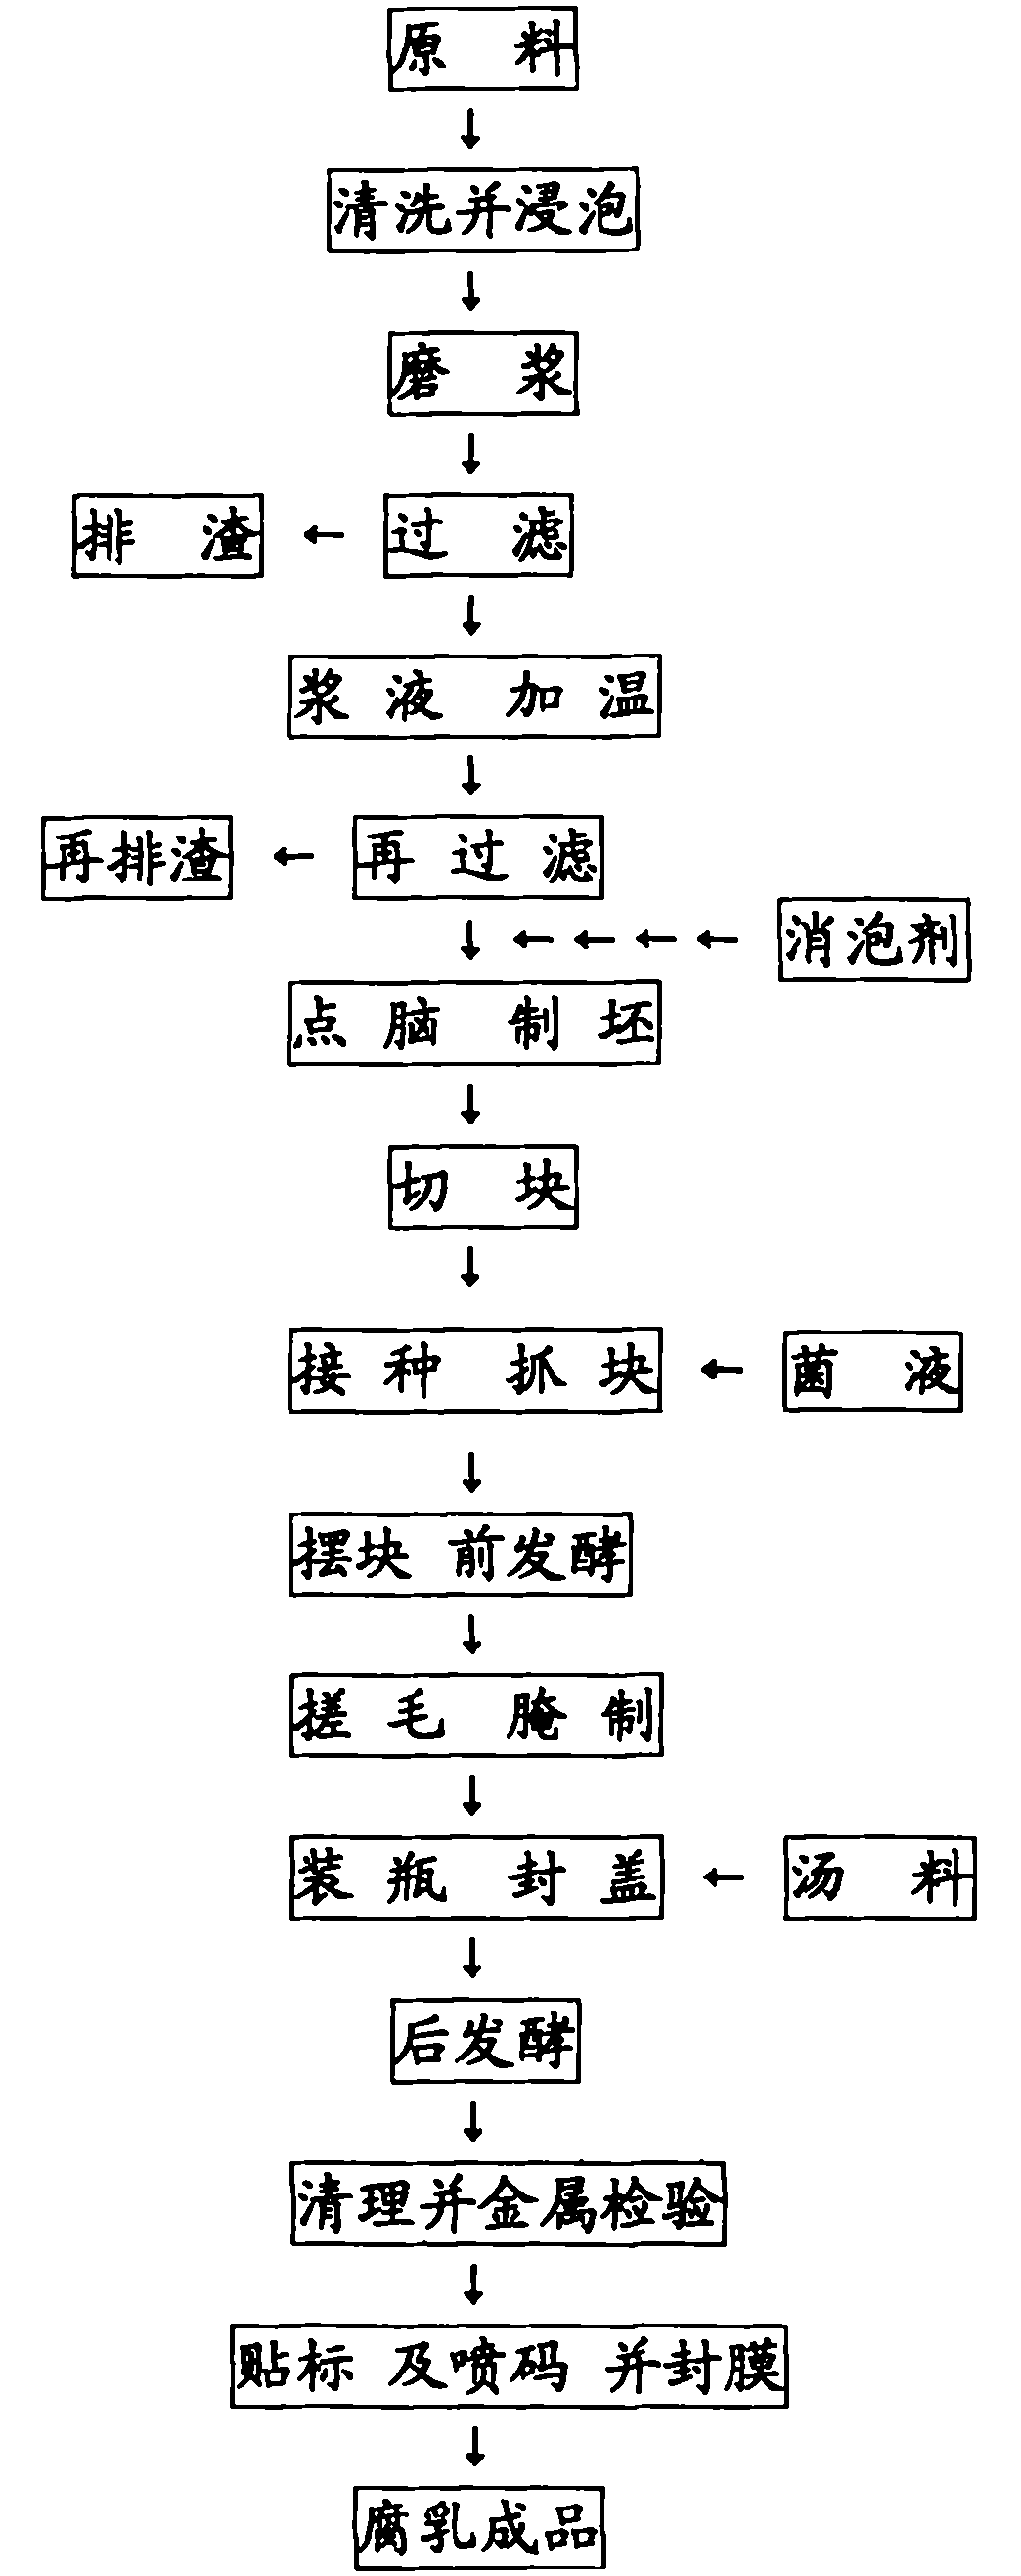 Production method of preserved beancurd